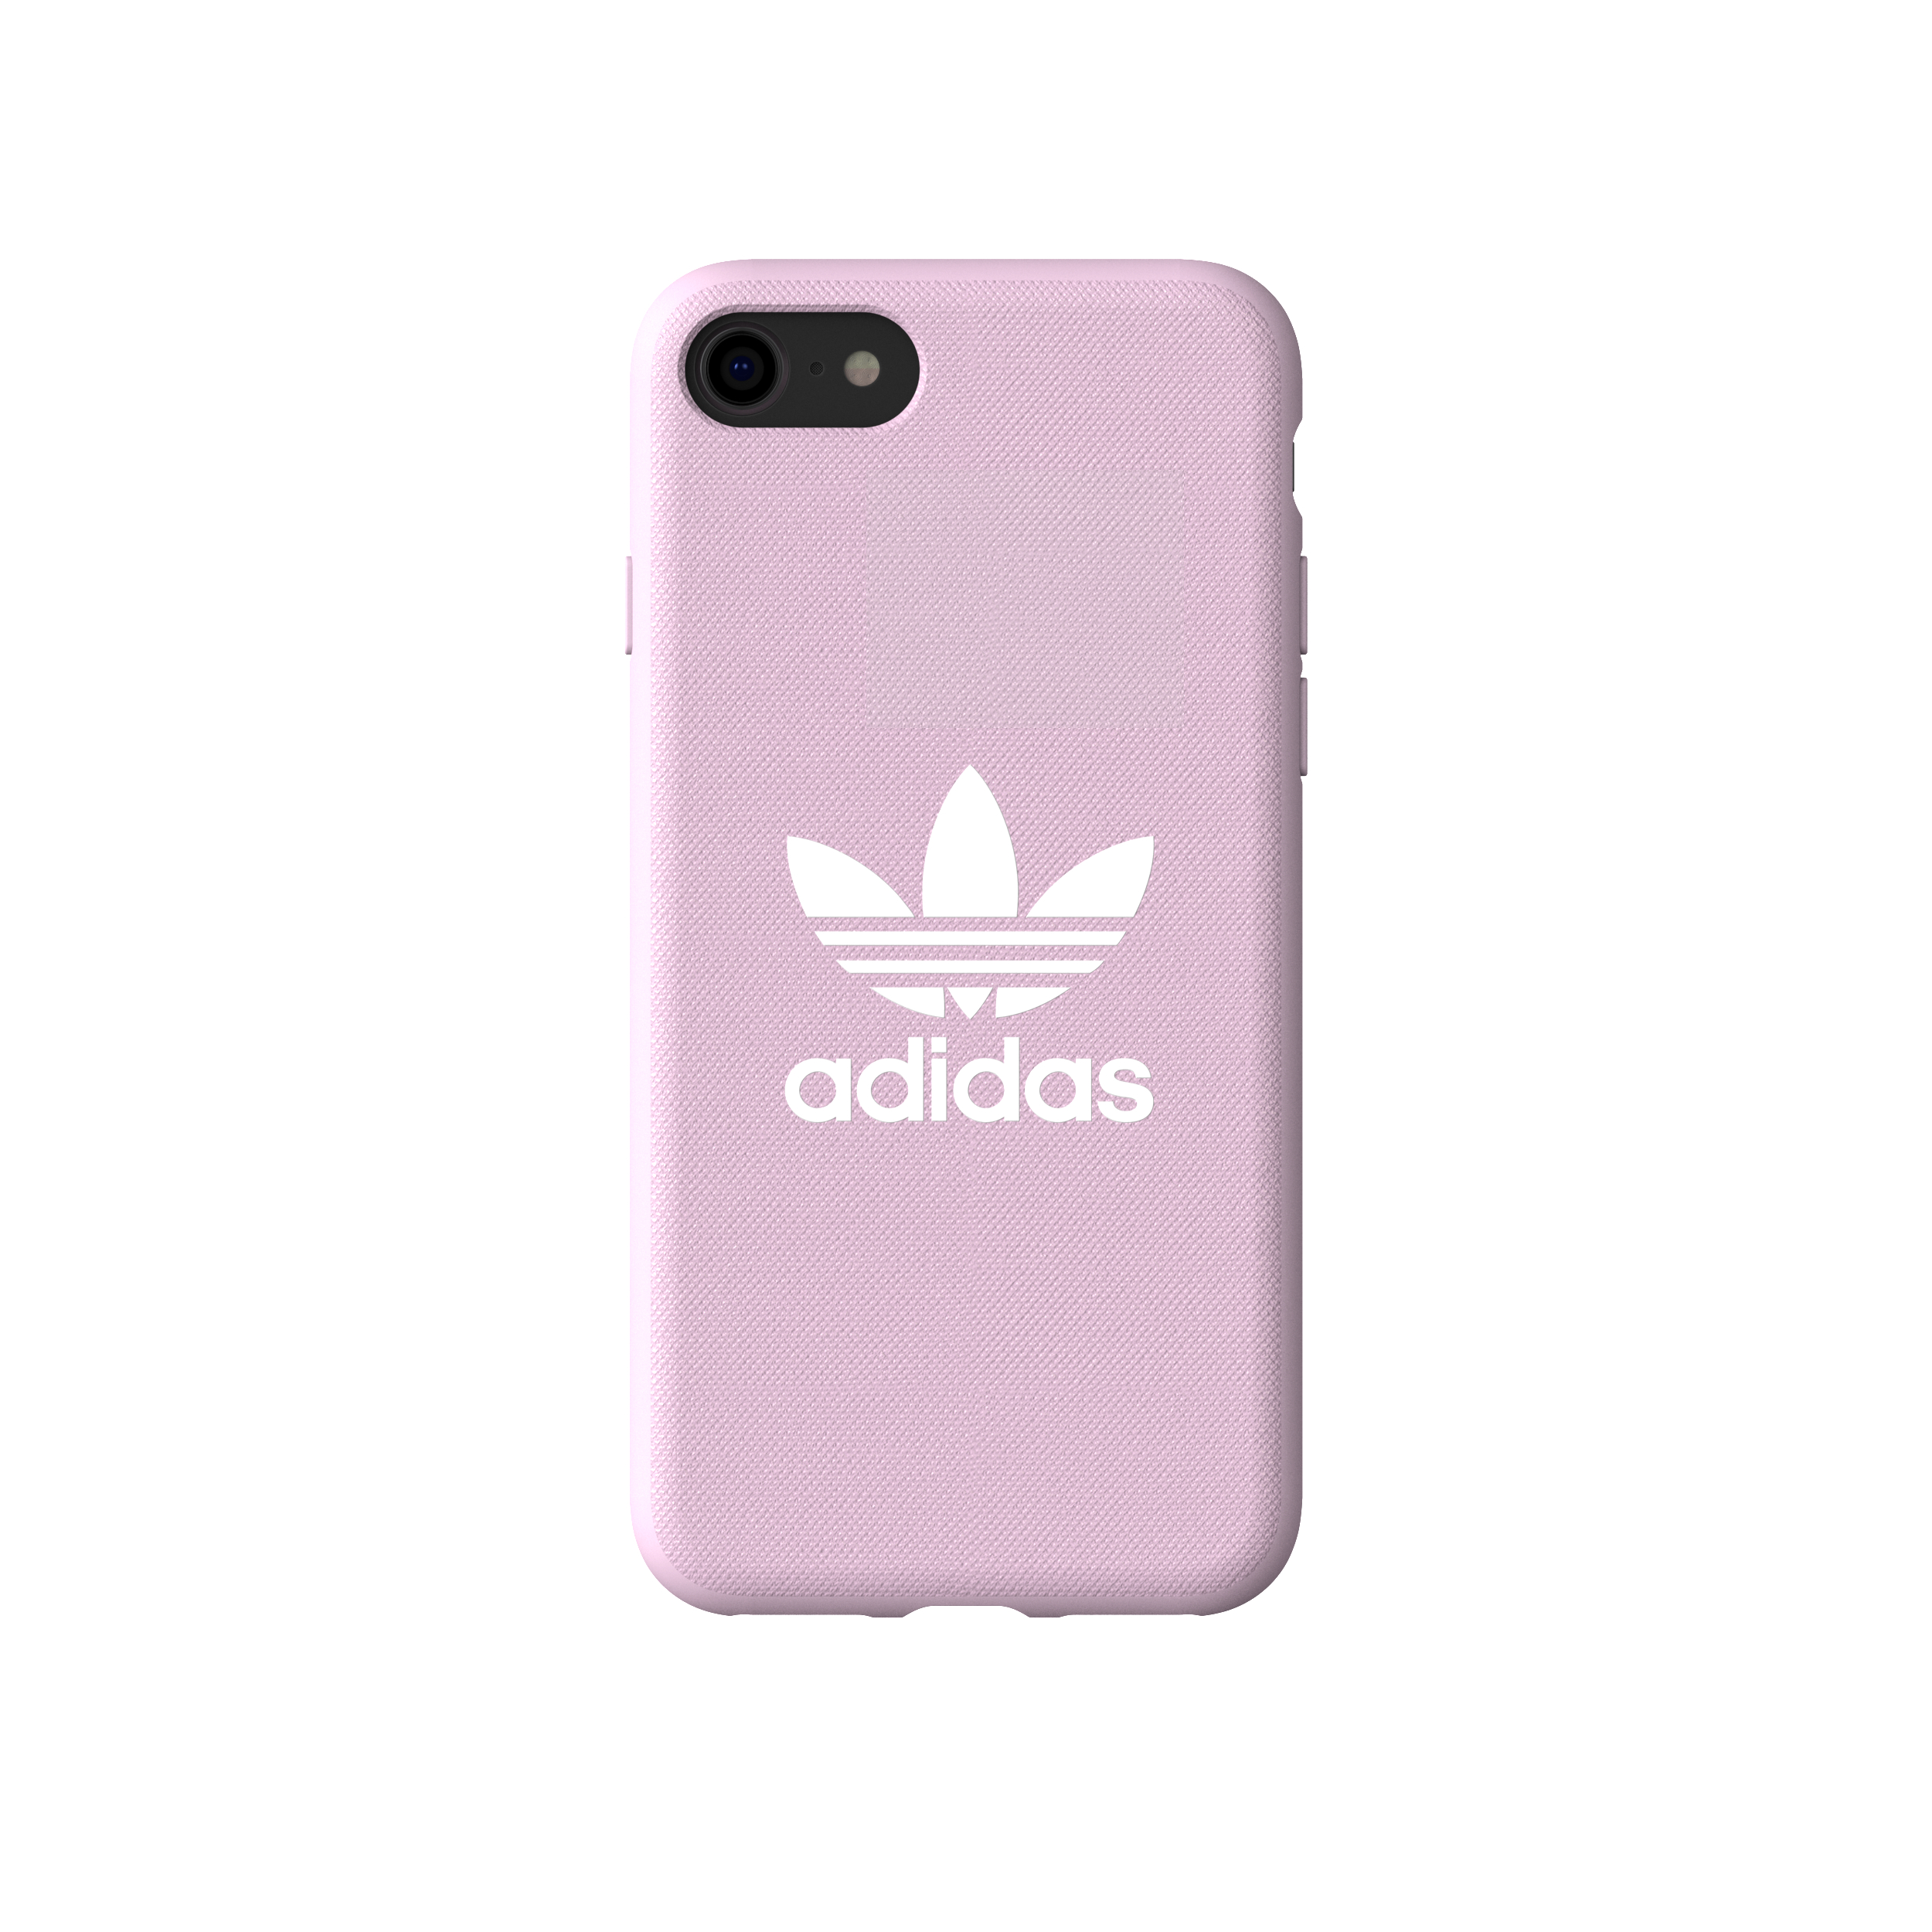 ADIDAS ORIGINALS 6, 7, (2020), Moulded iPhone iPhone SE Apple, iPhone Backcover, 8, iPhone Rosa OR Case